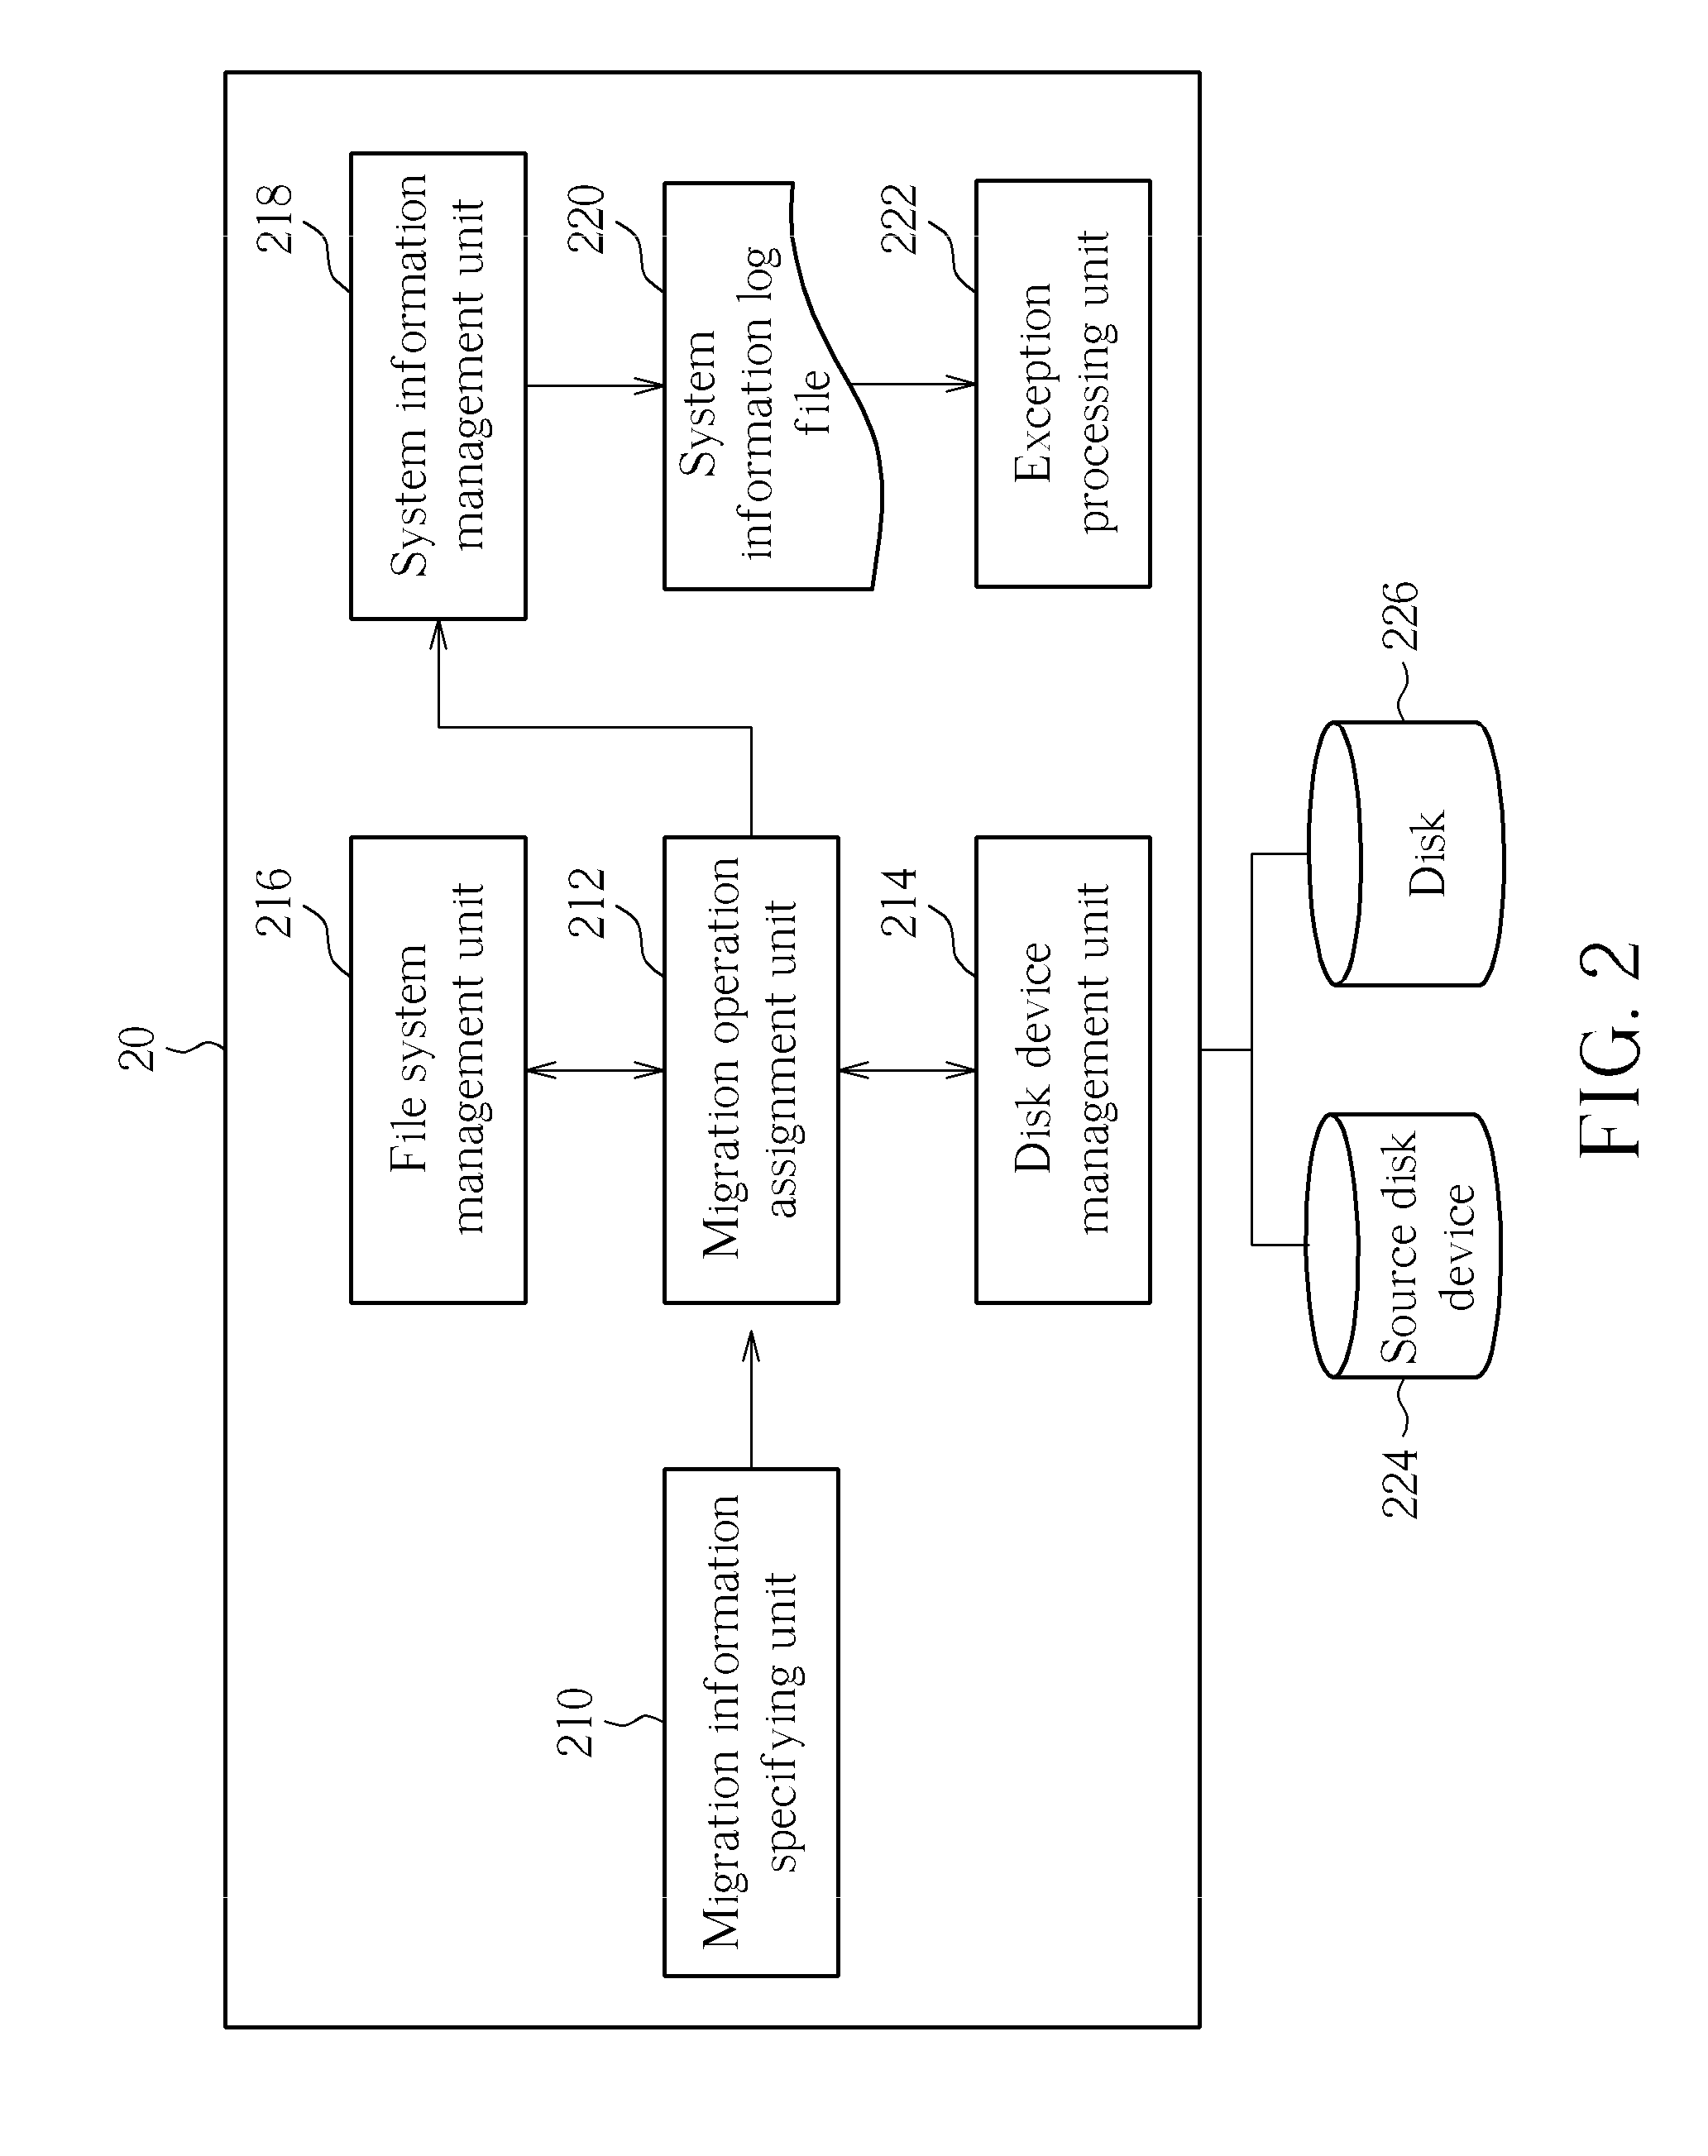 Raid level migration method for performing online raid level migration and adding disk to destination raid, and associated system